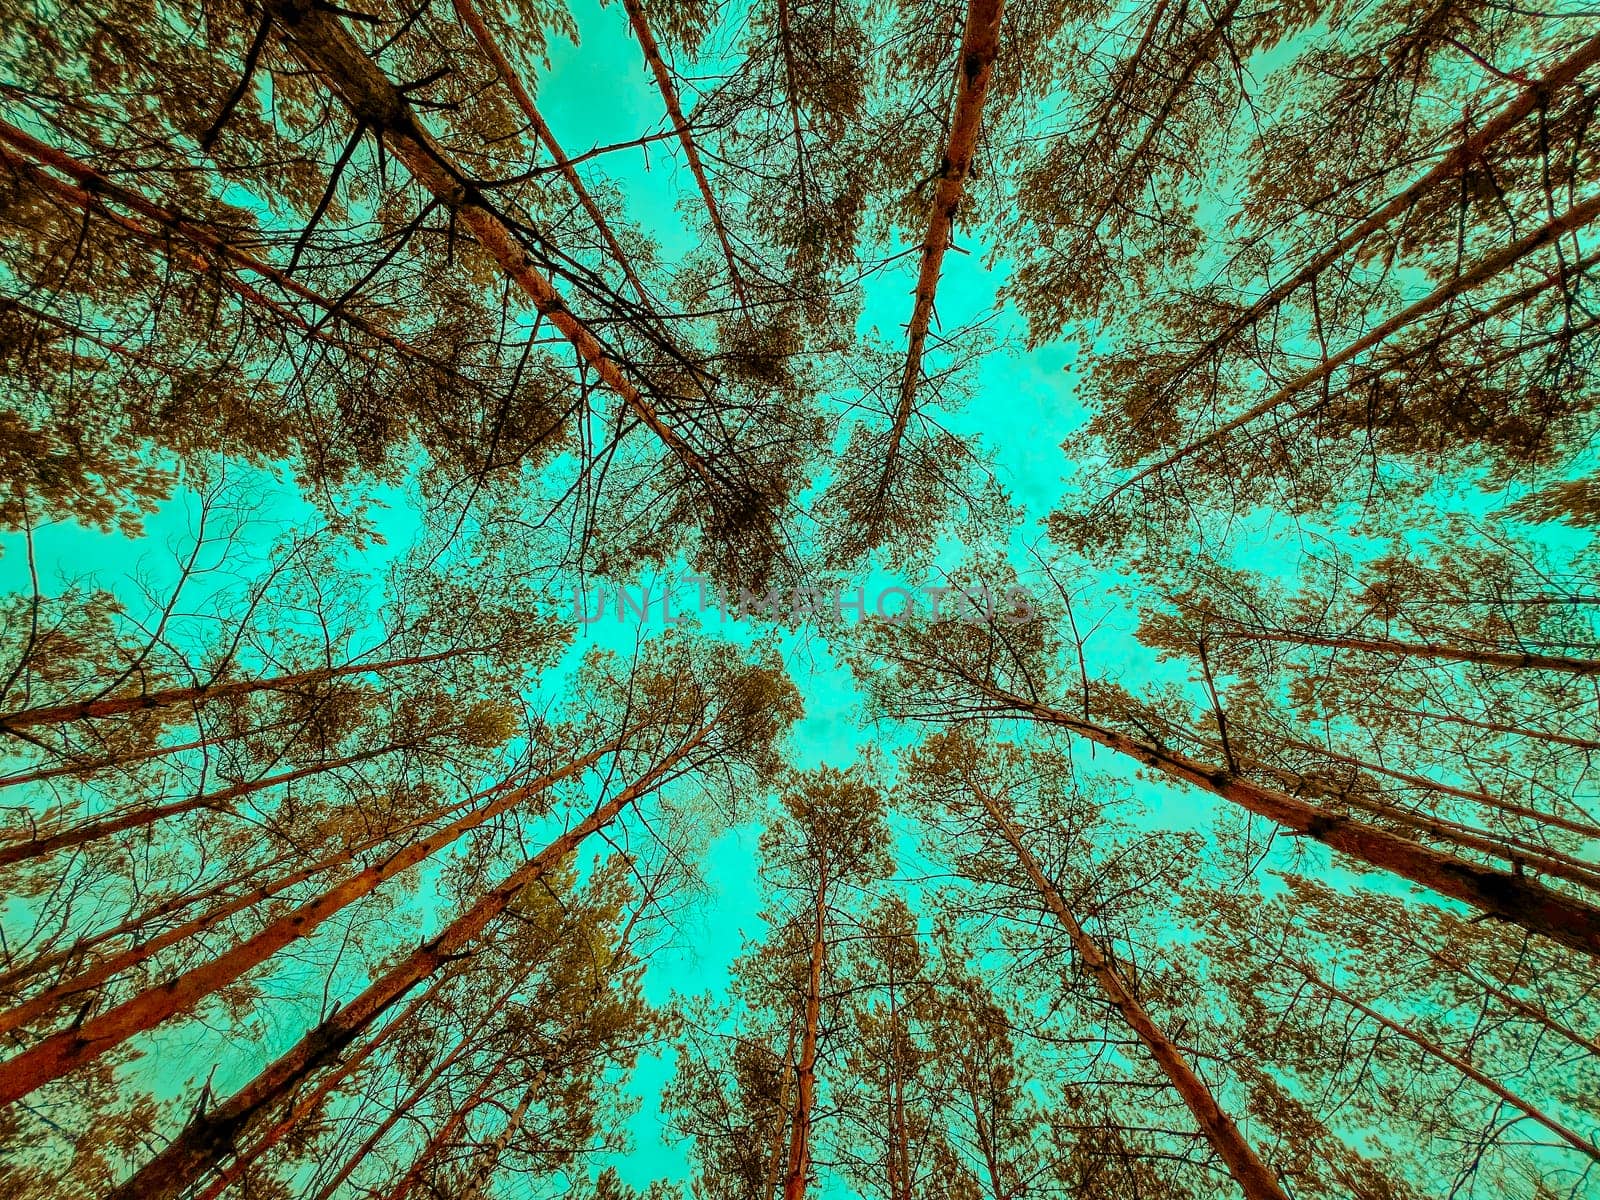 Bottom view of tall old trees in evergreen pine forest. Blue sky in background